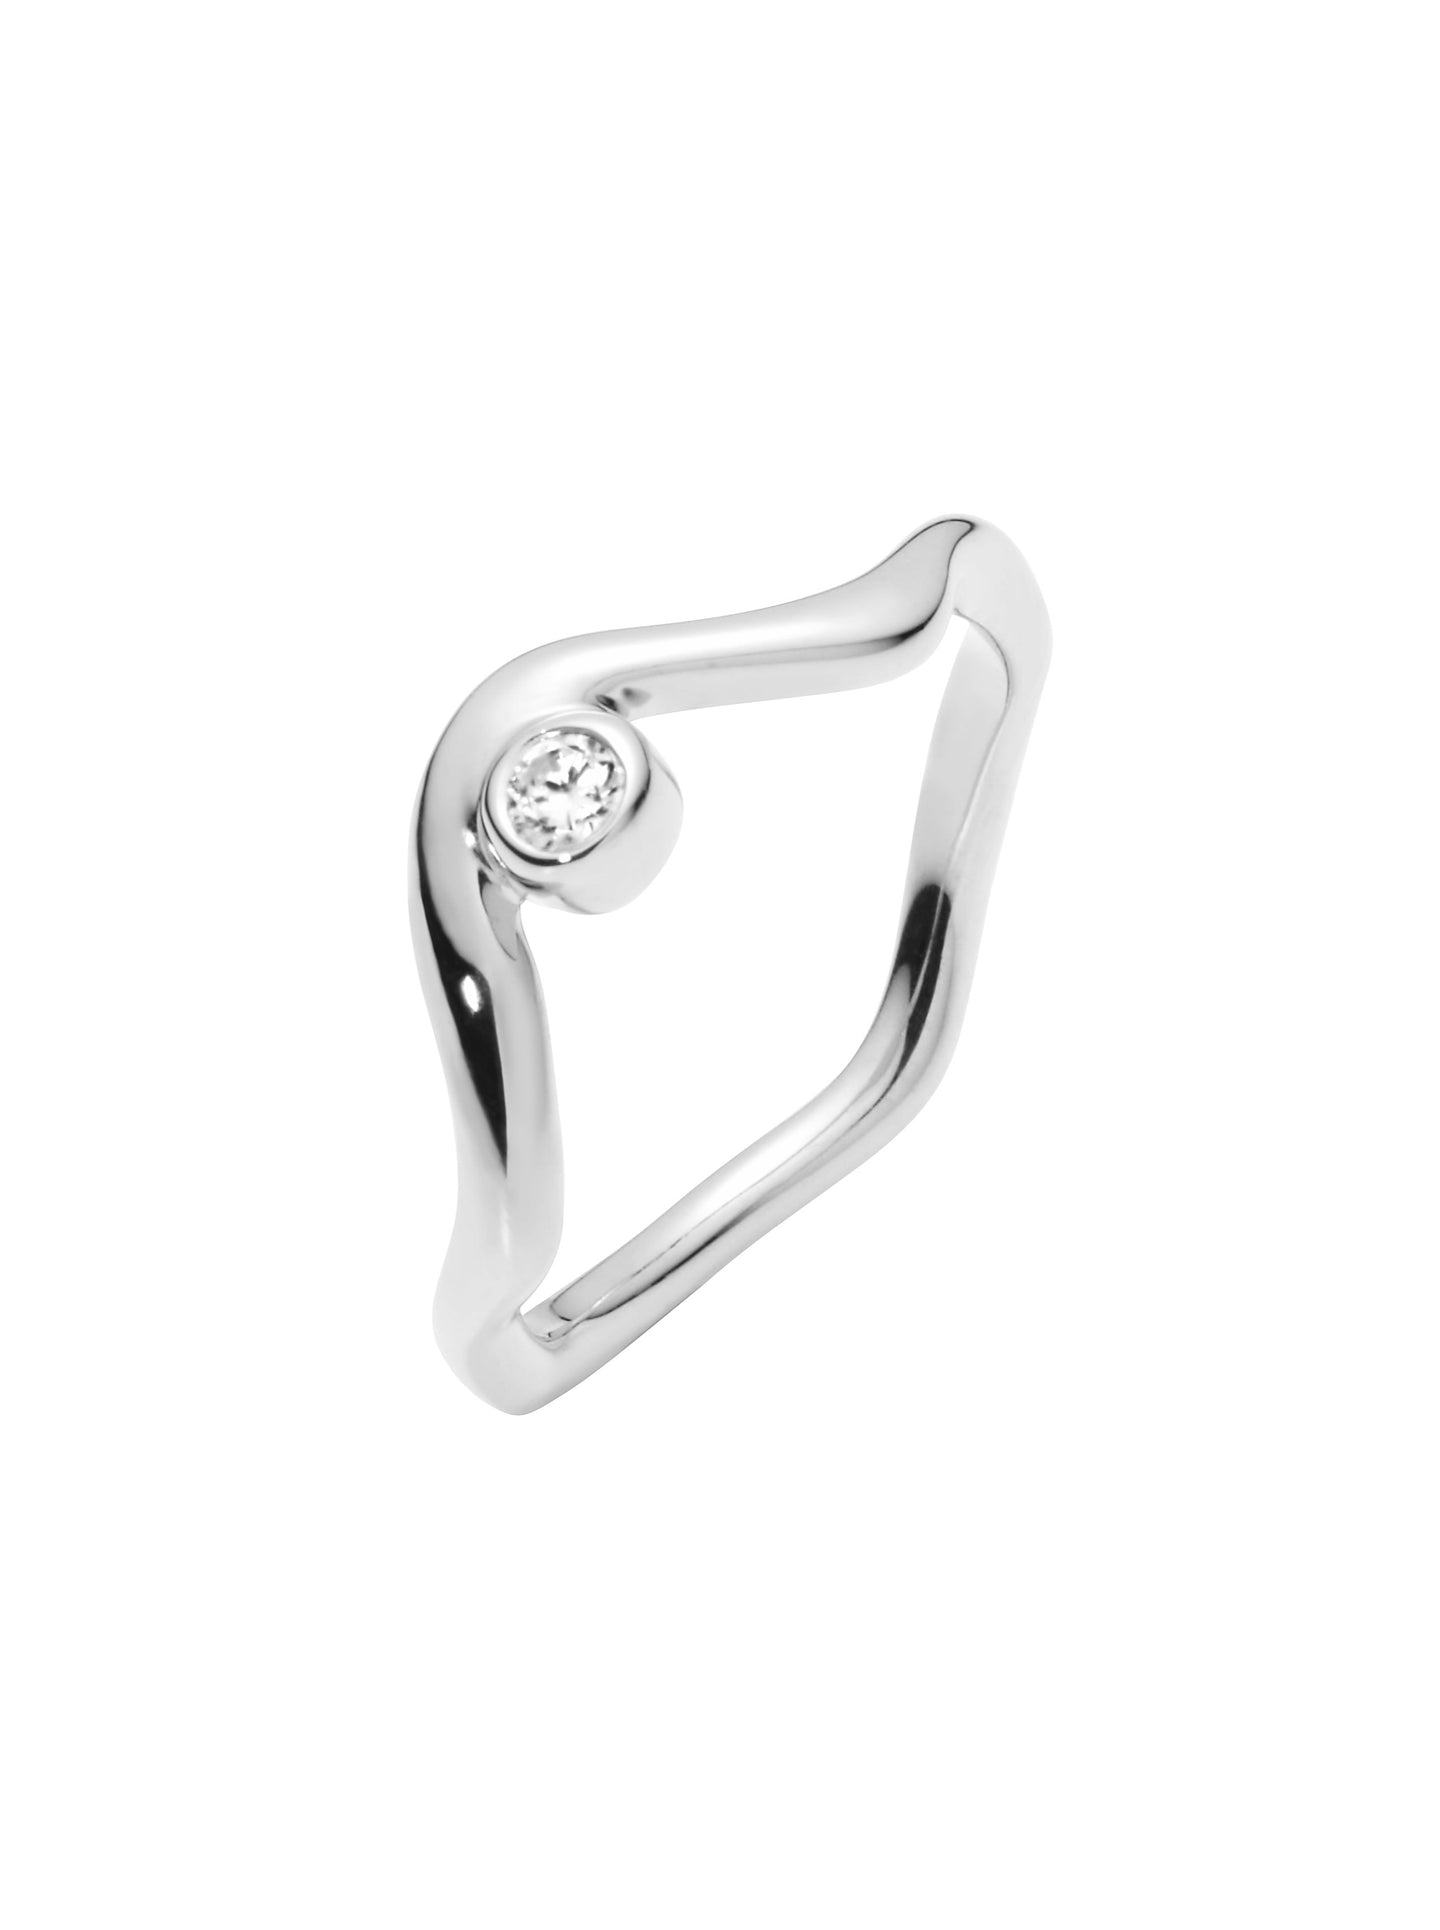 NORA RING| SILVER BY MARIA BLACK 